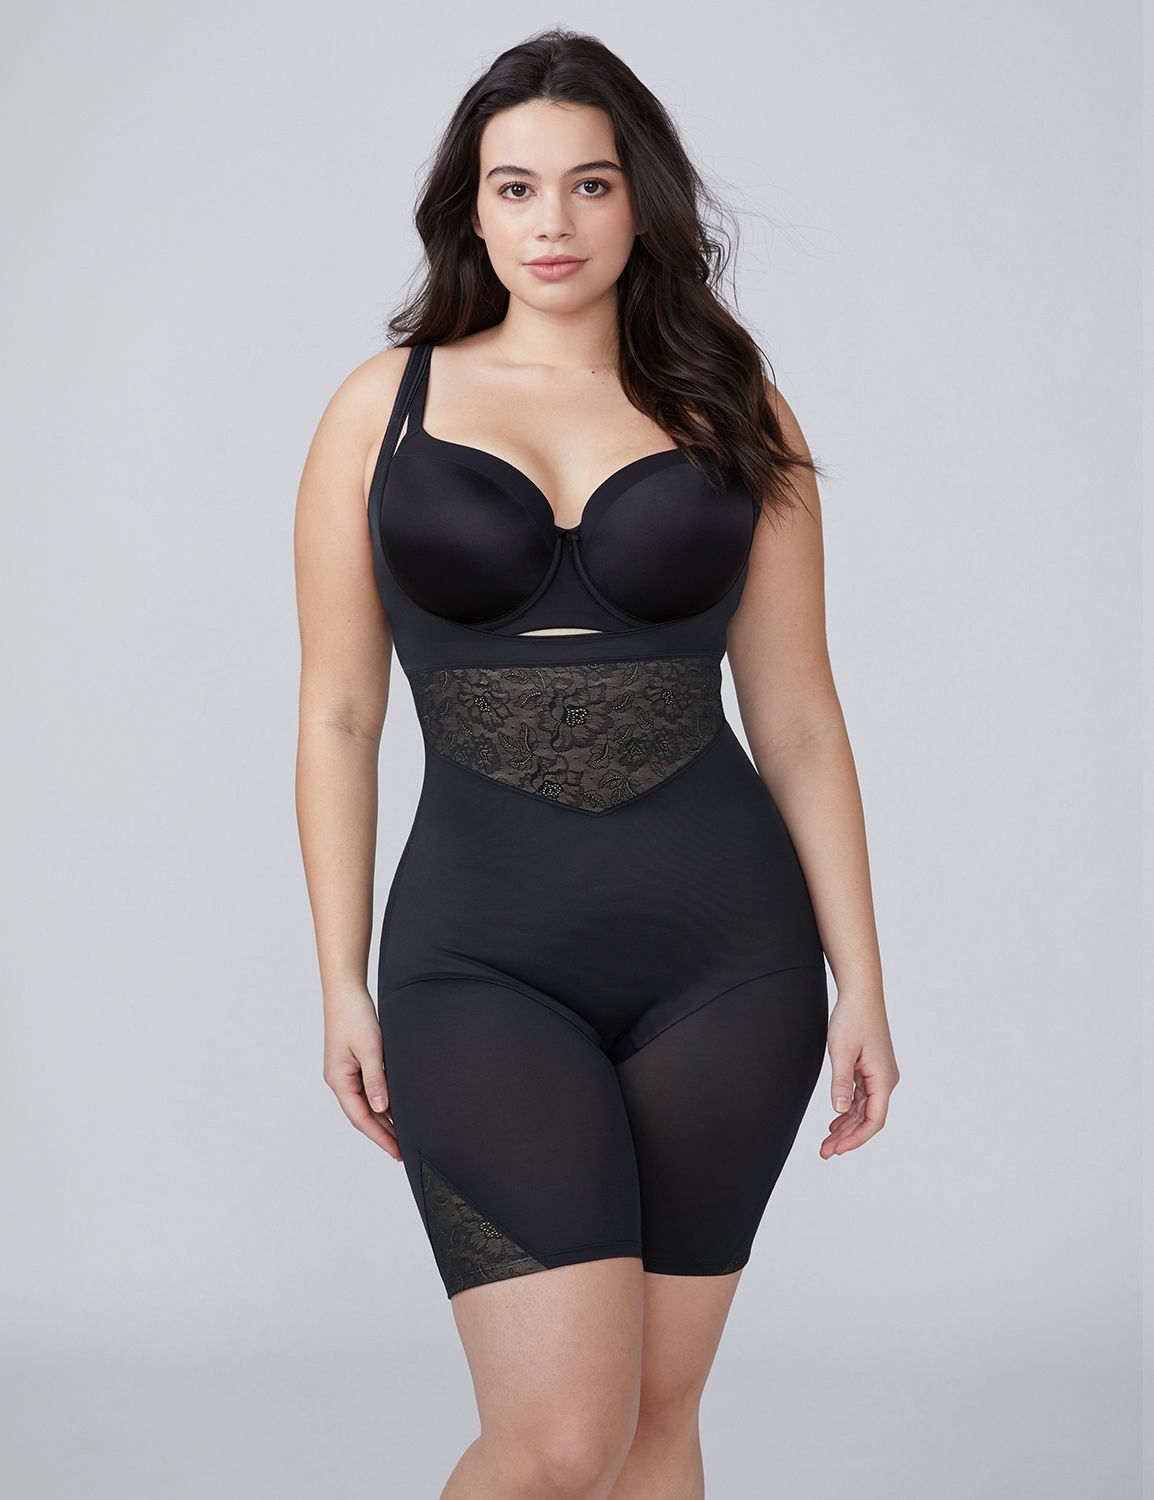 Cacique by Lane Bryant. Open-bust thigh shaper.